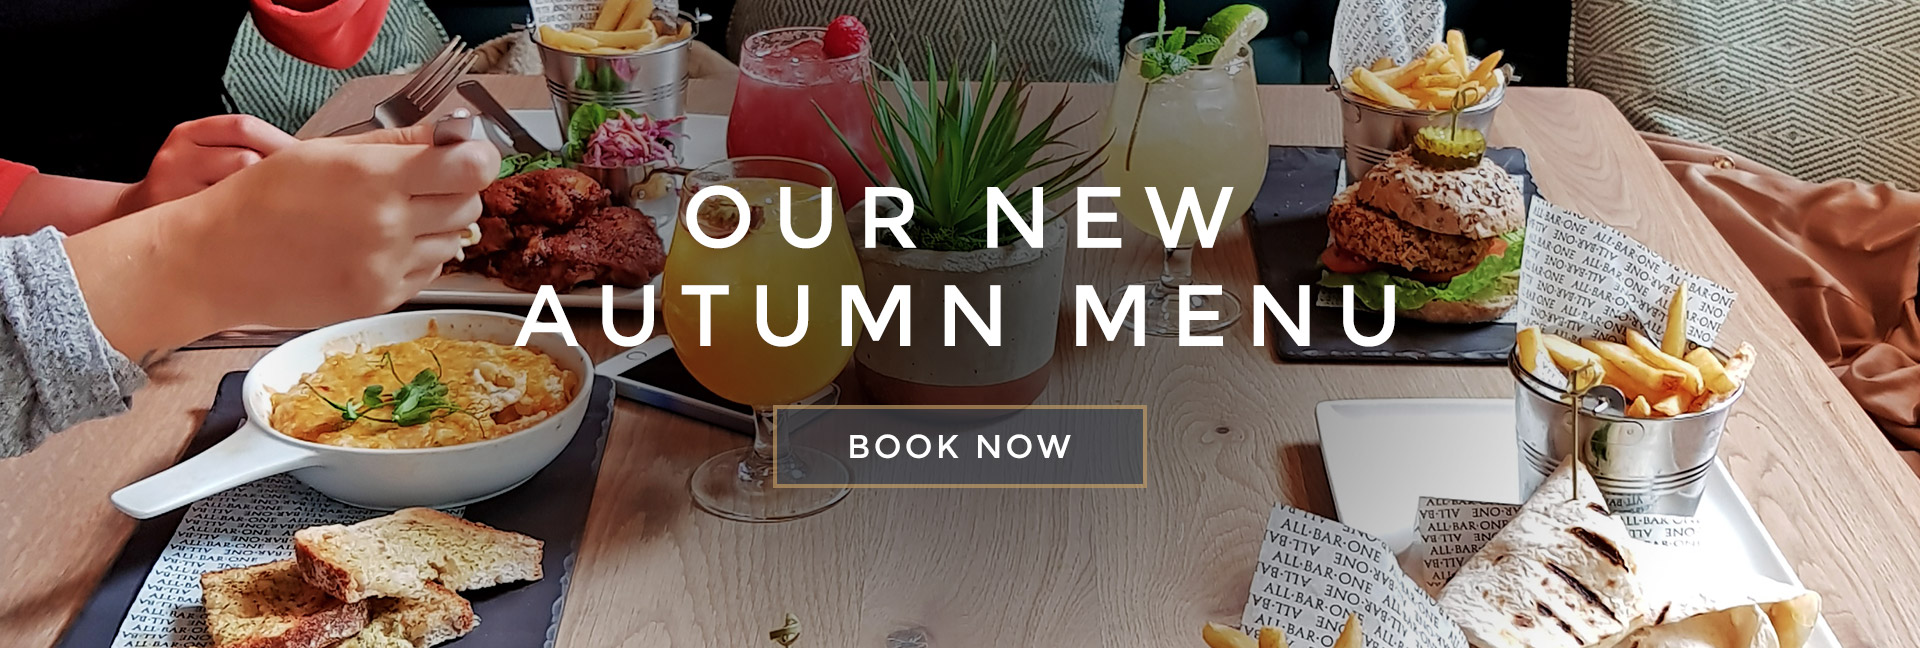 Our new Autumn menu at All Bar One Oxford - Book now